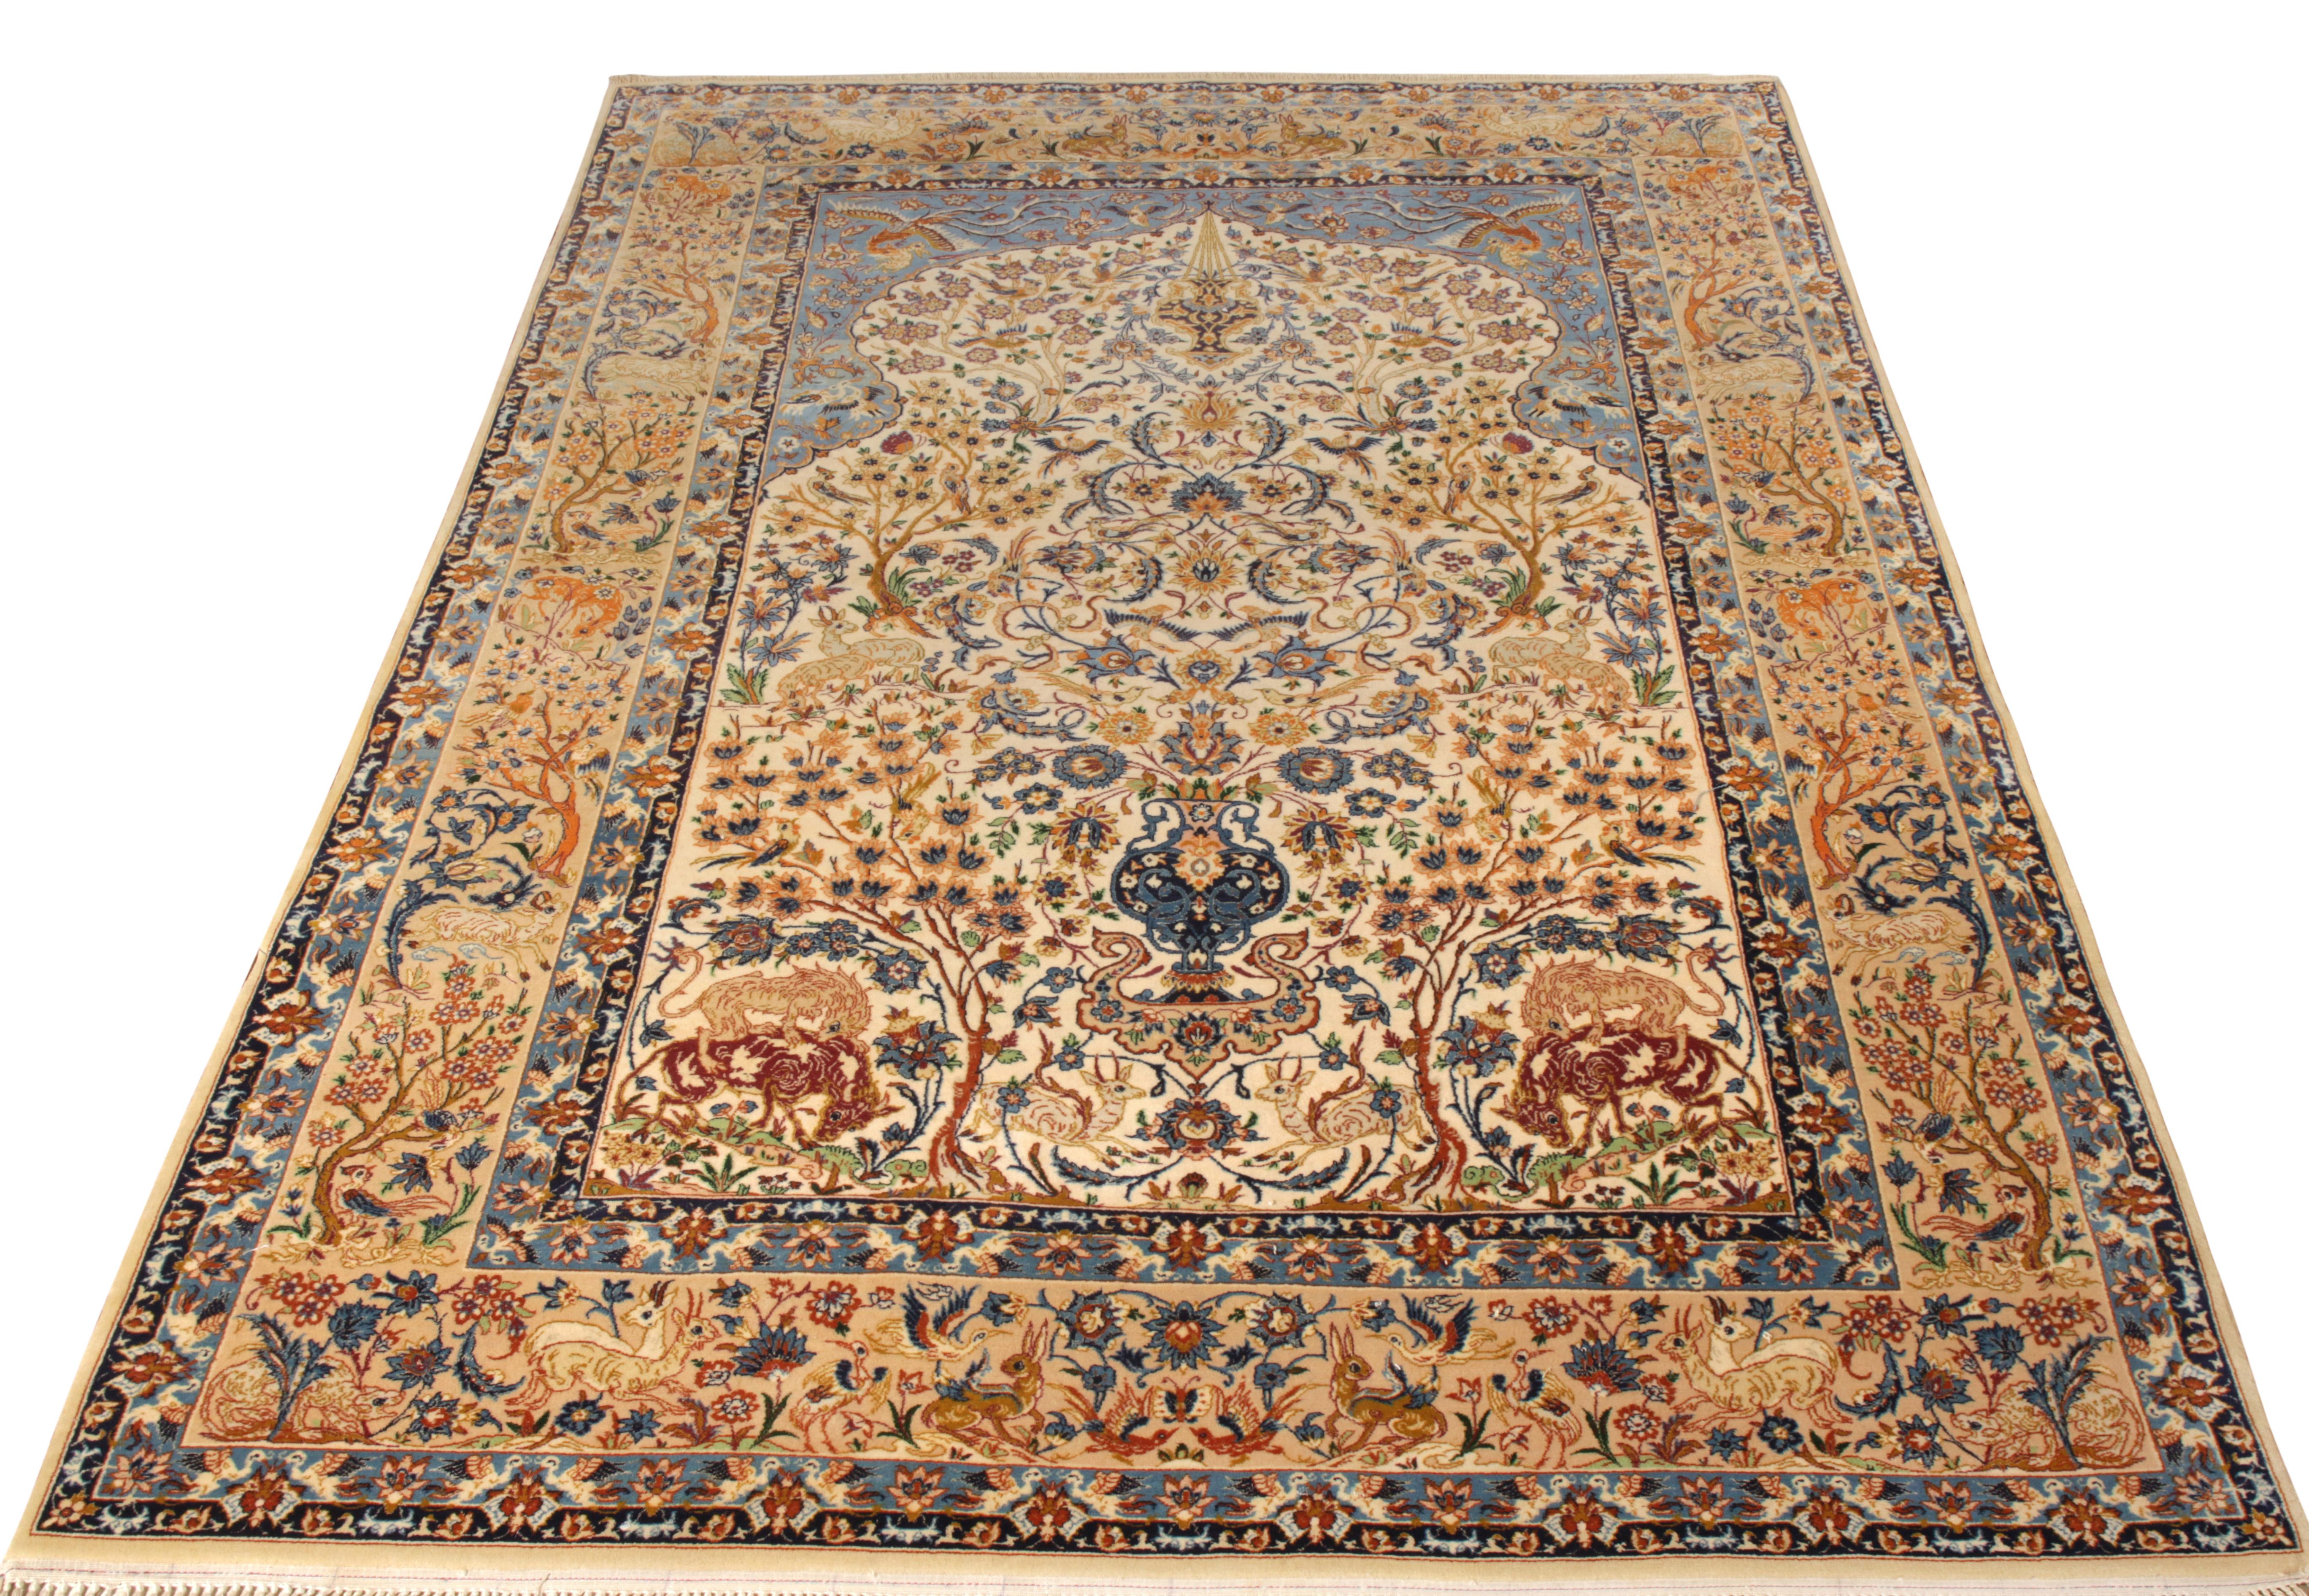 Belonging to the 1920s, a 5 X 8 hand-knotted piece from Rug & Kilim’s Antique & Vintage collection. A scintillating combination of Blue & Orange brings to life a breathtaking floral pattern intricately packed in pervasive border highlighting the